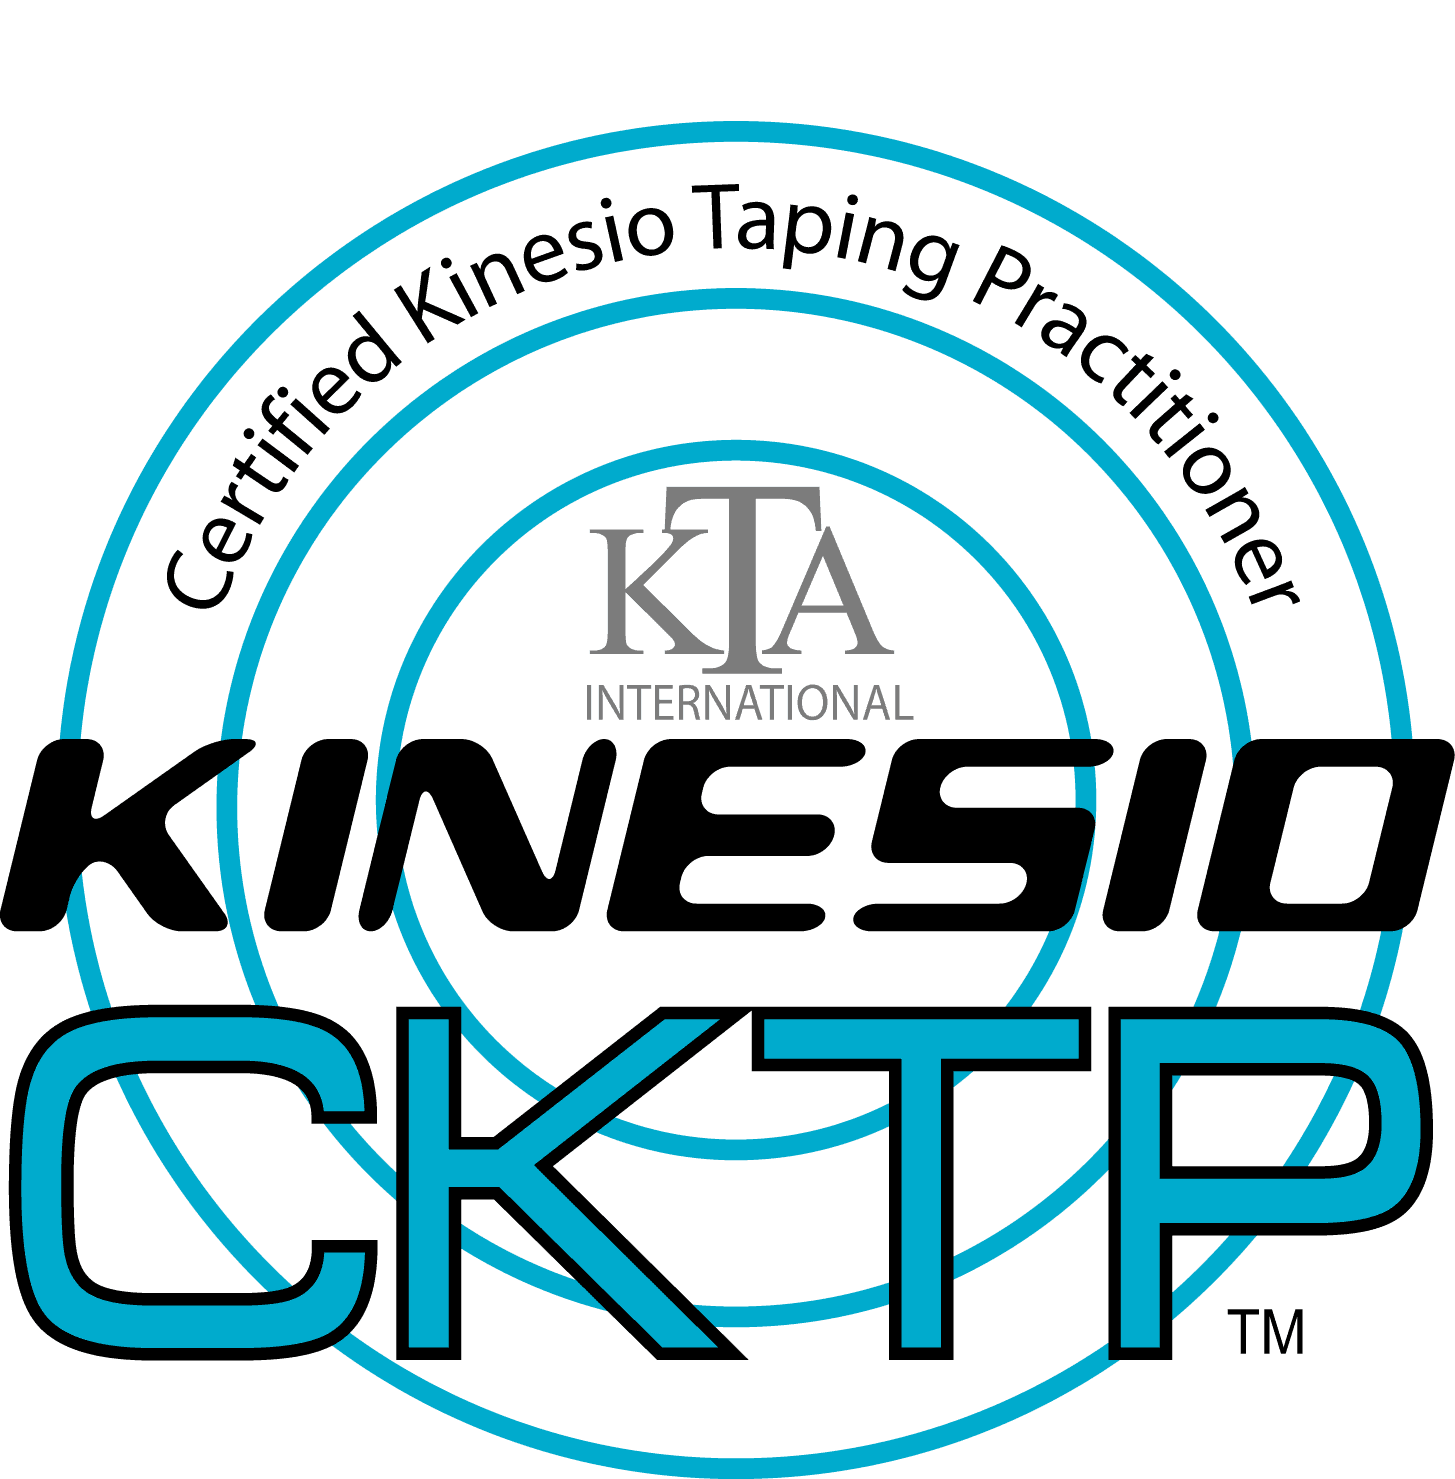 A logo for a kinesio taping practitioner